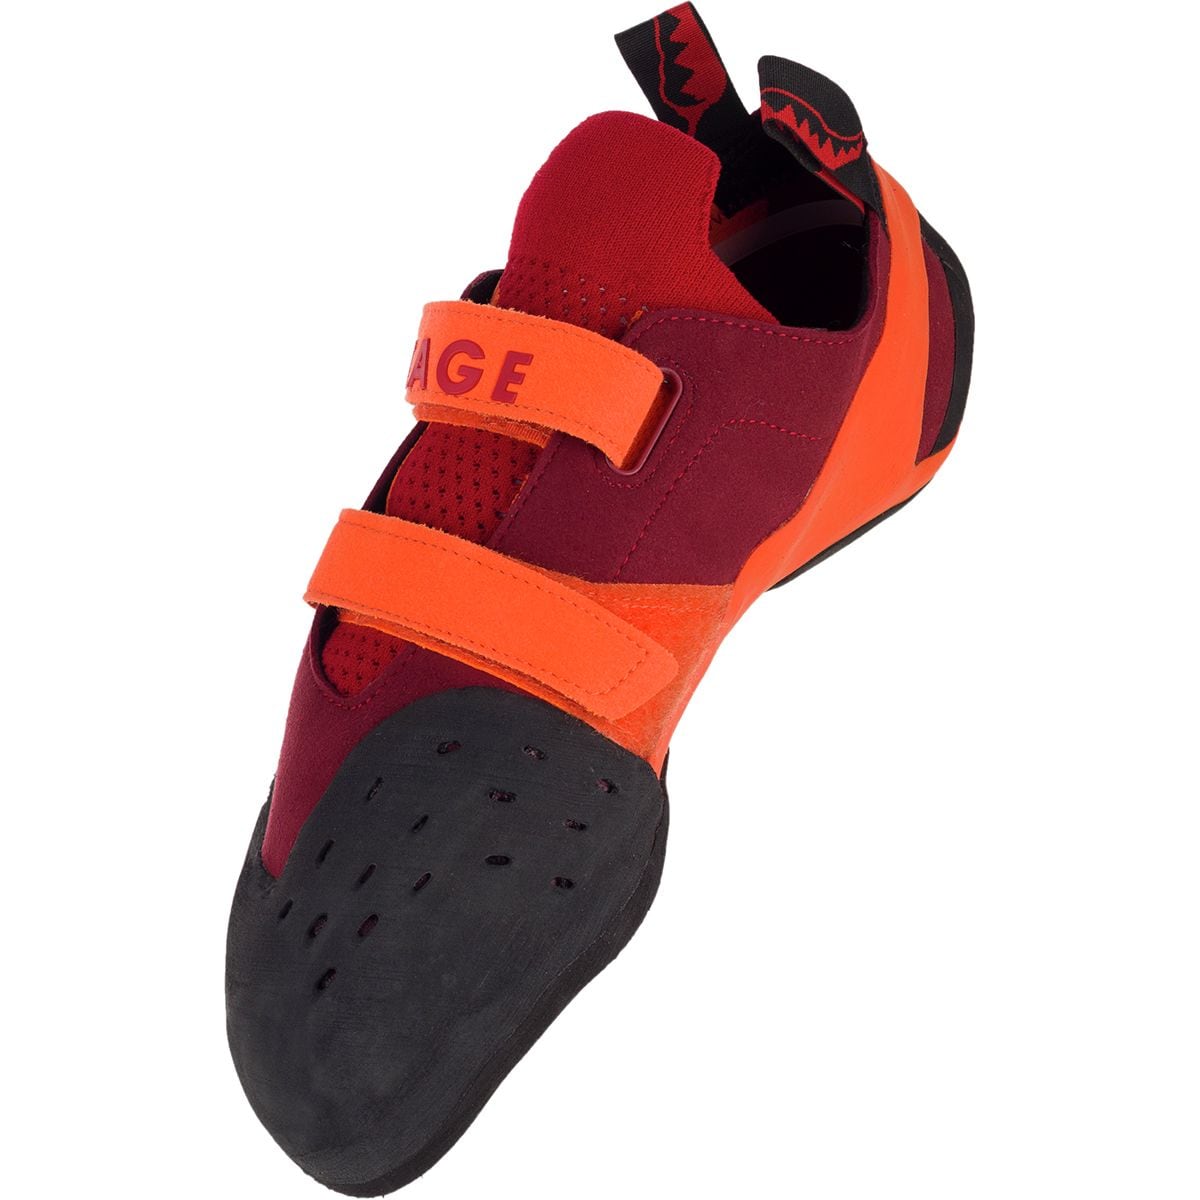 Red Chili Voltage II Climbing Shoe - 7 - Red